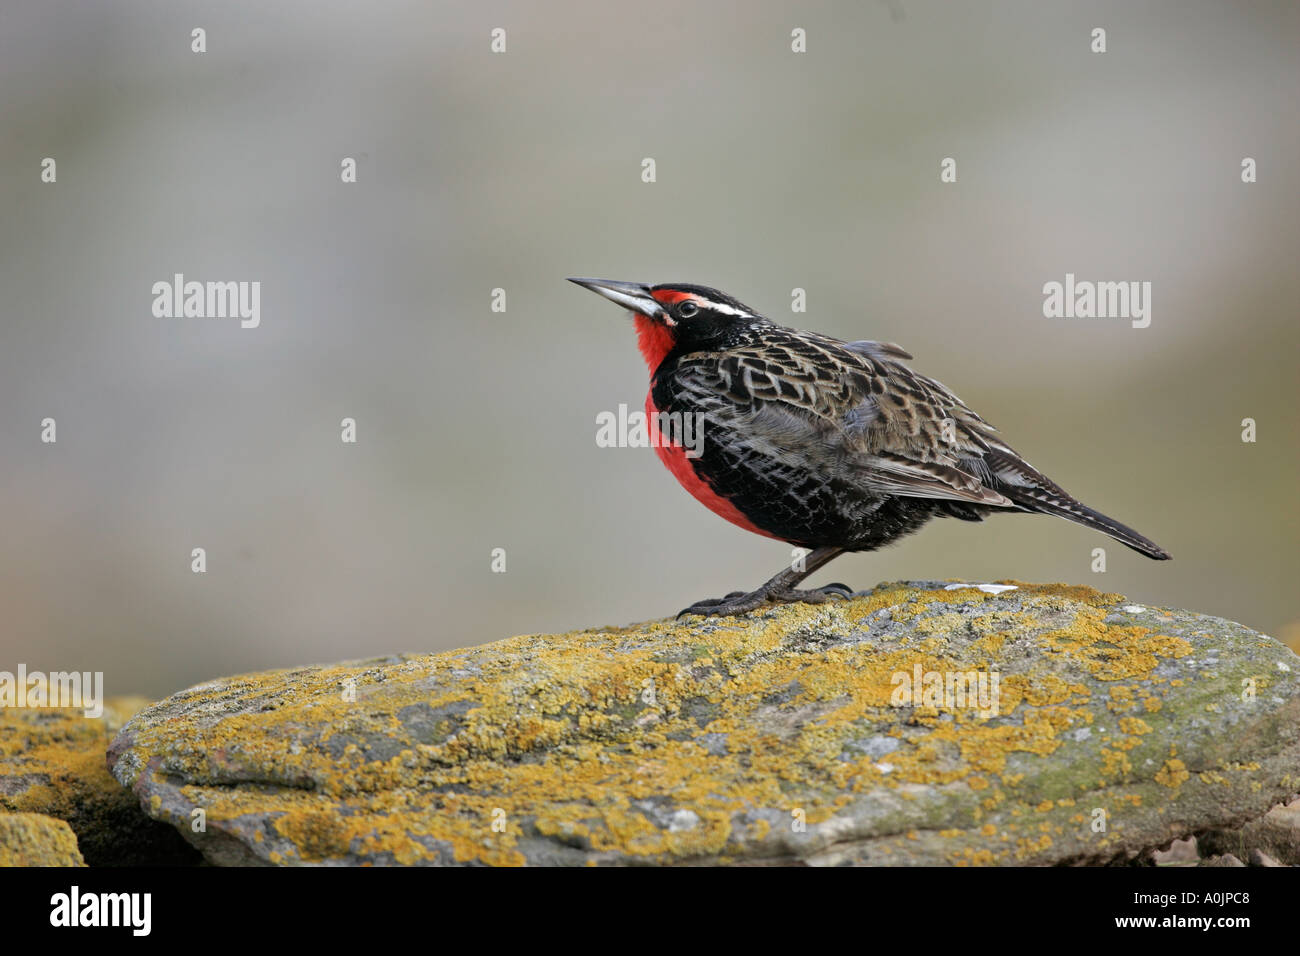 LONG TAILED MEADOW LARK OR MILITARY STARLING Sturnella loyca Stock Photo